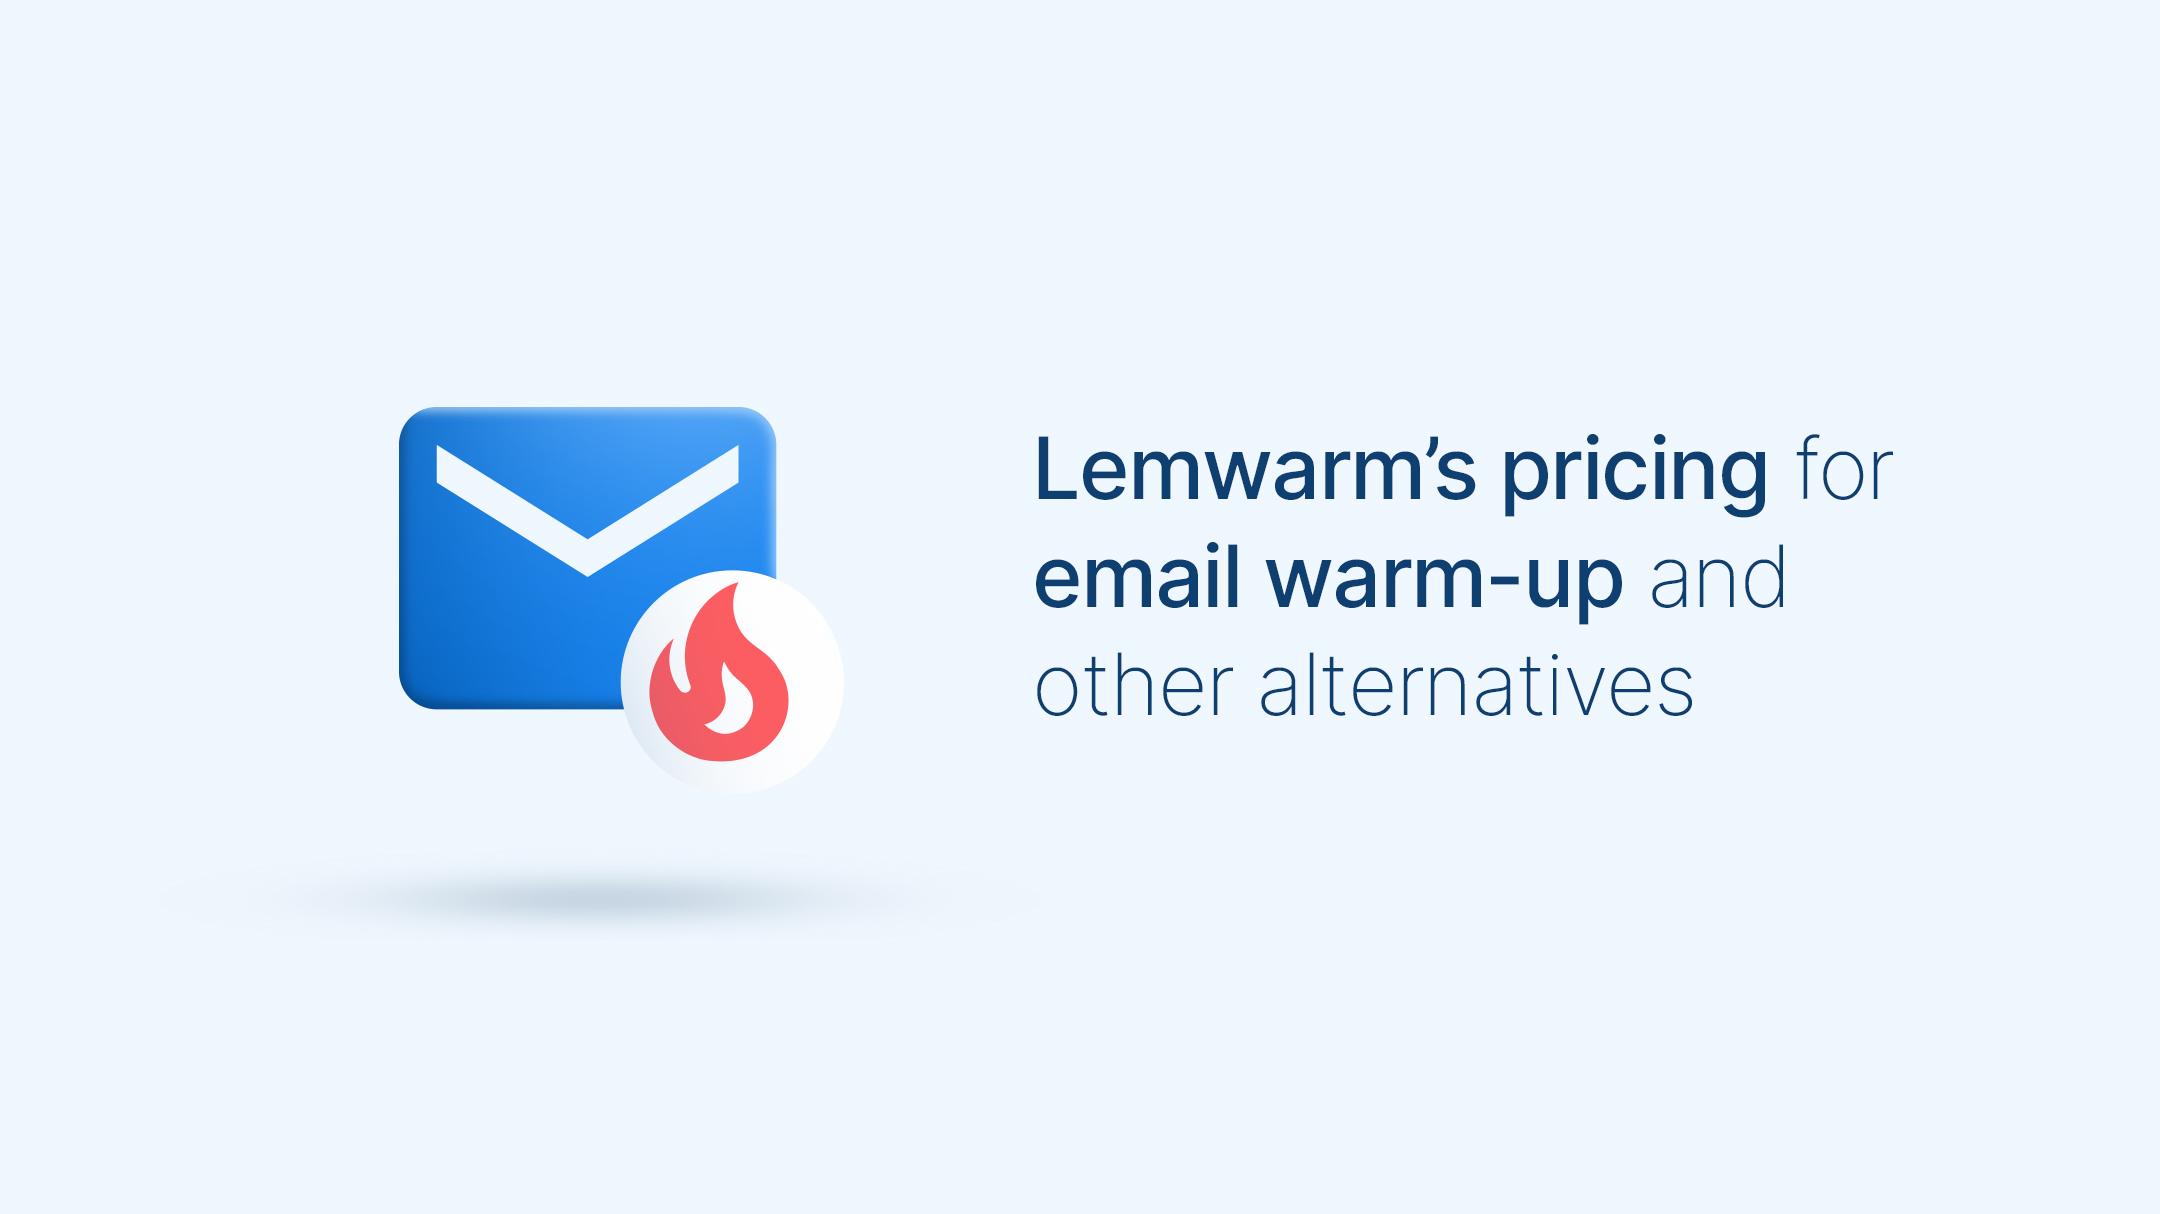 Lemwarm Pricing for Email Warm-up and Other Alternatives